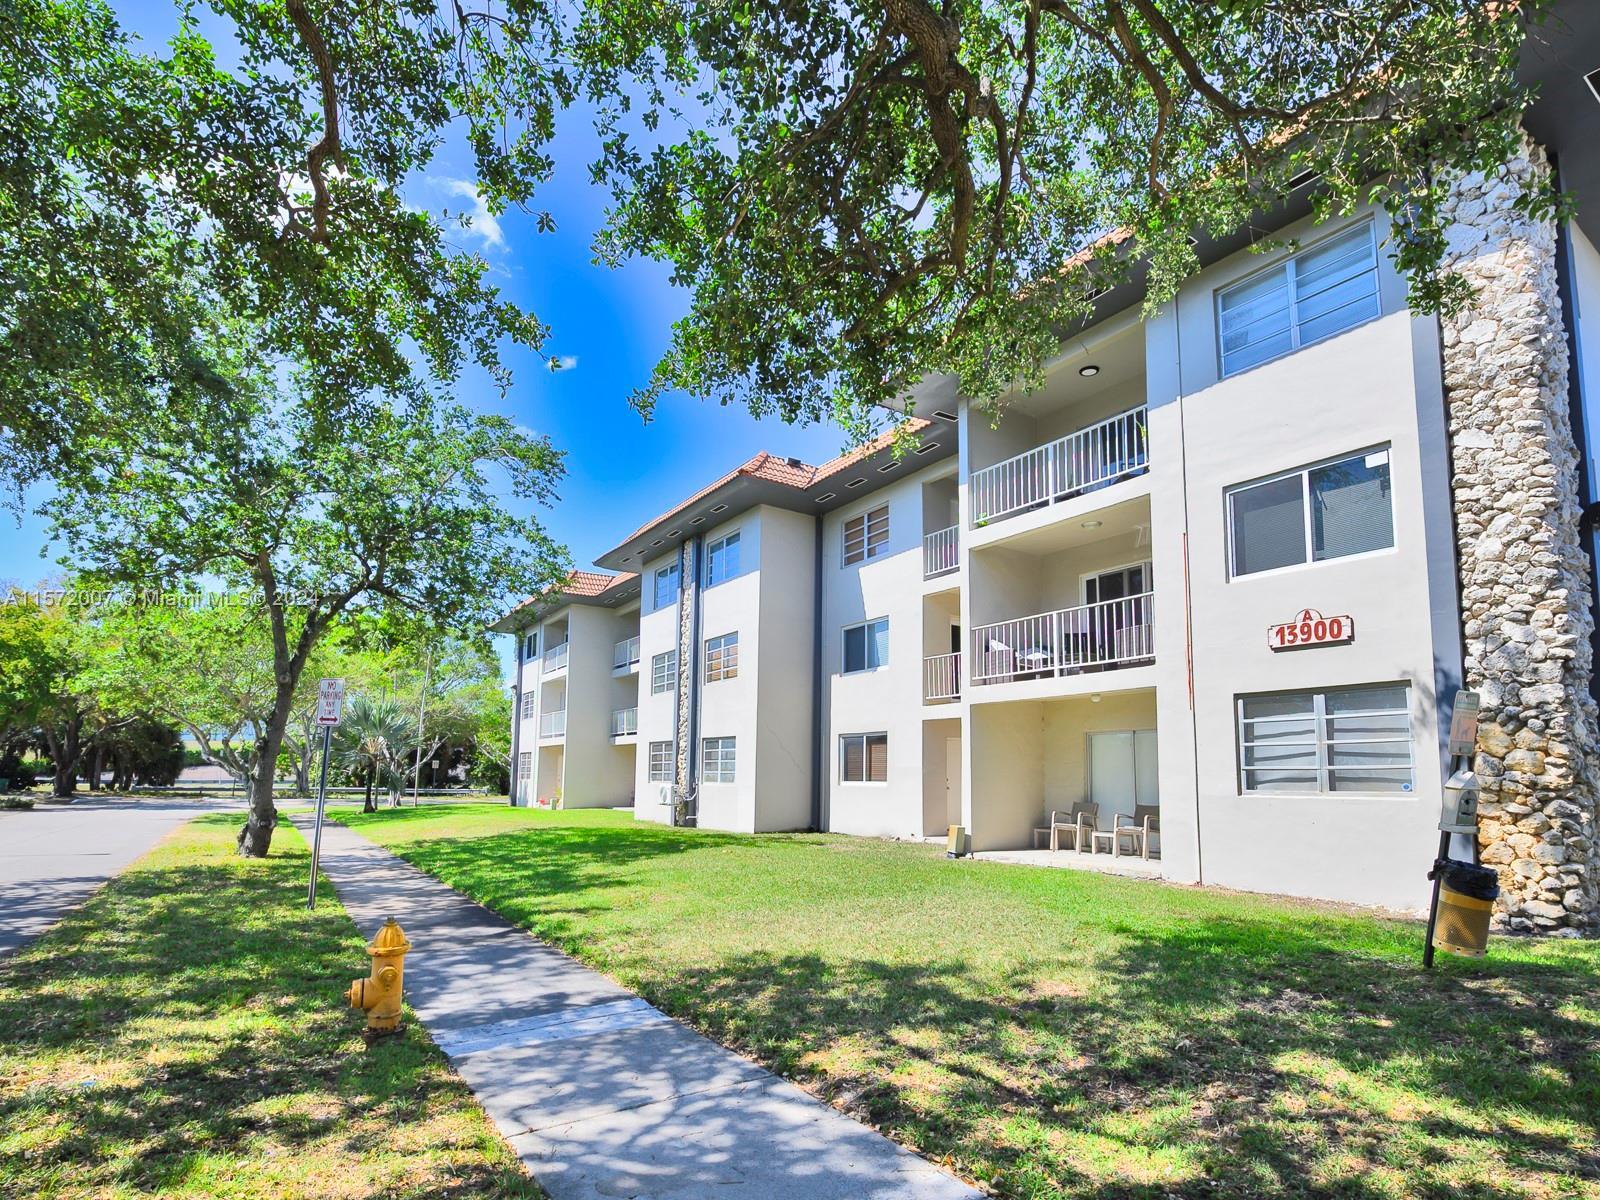 Spectacular opportunity to own this renovated 2 Bed / 1 Bath condo in the Town of Miami Lakes. Quiet